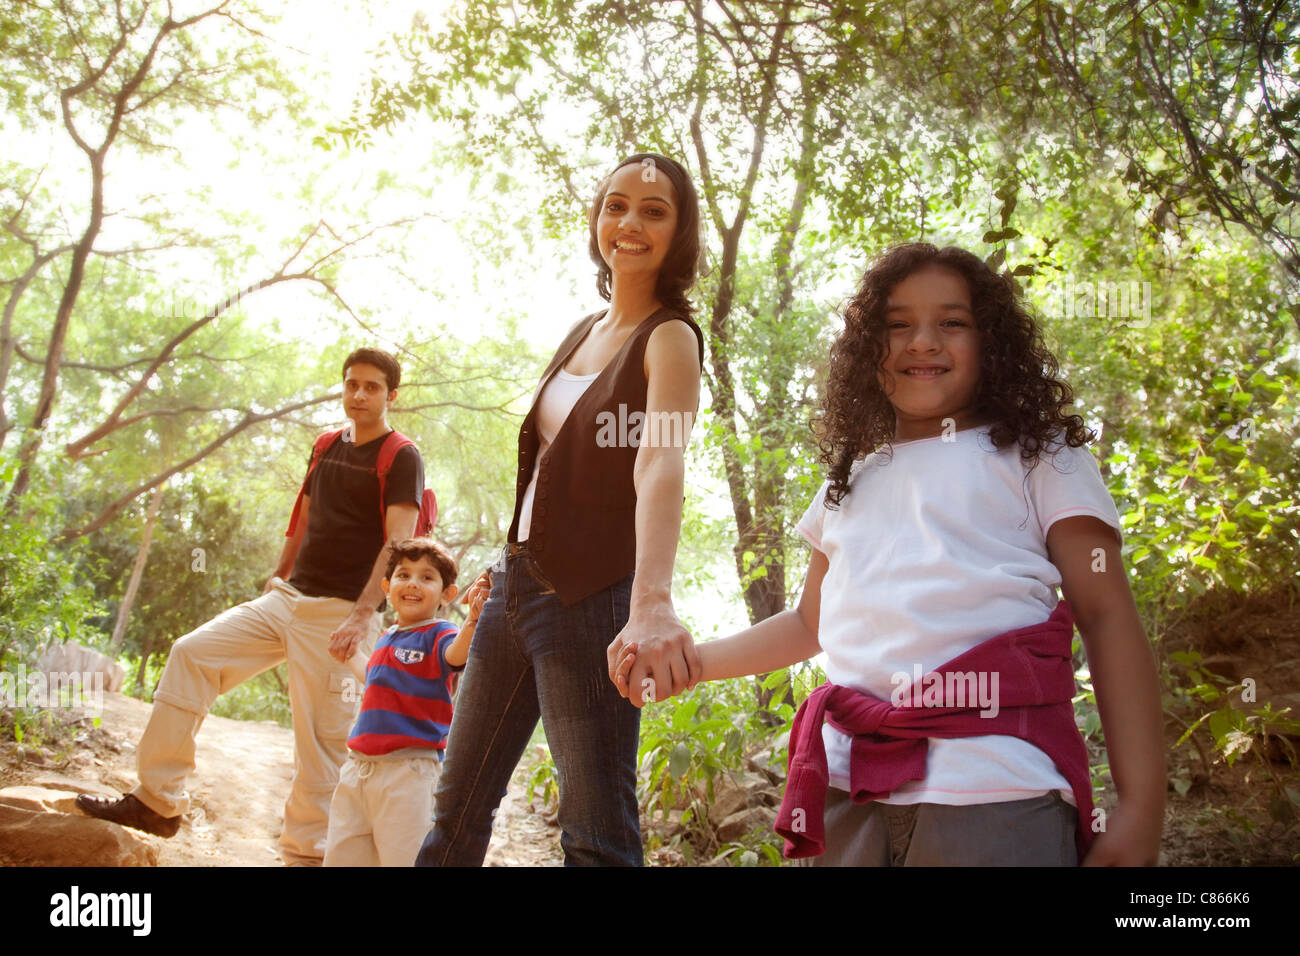 Portrait of a family in a park Stock Photo